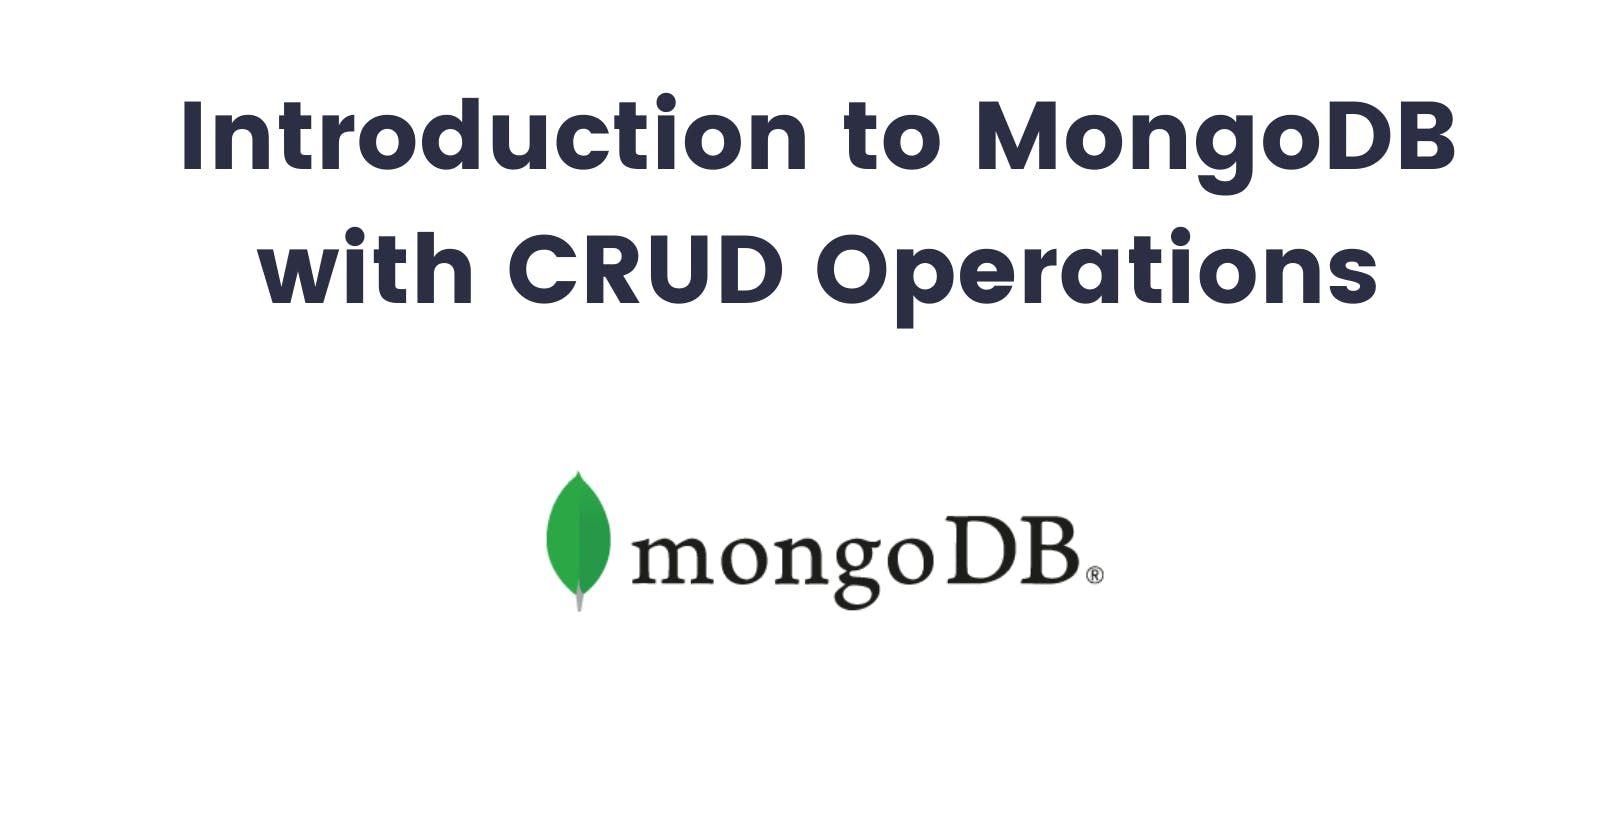 Introduction to MongoDB with CRUD Operations